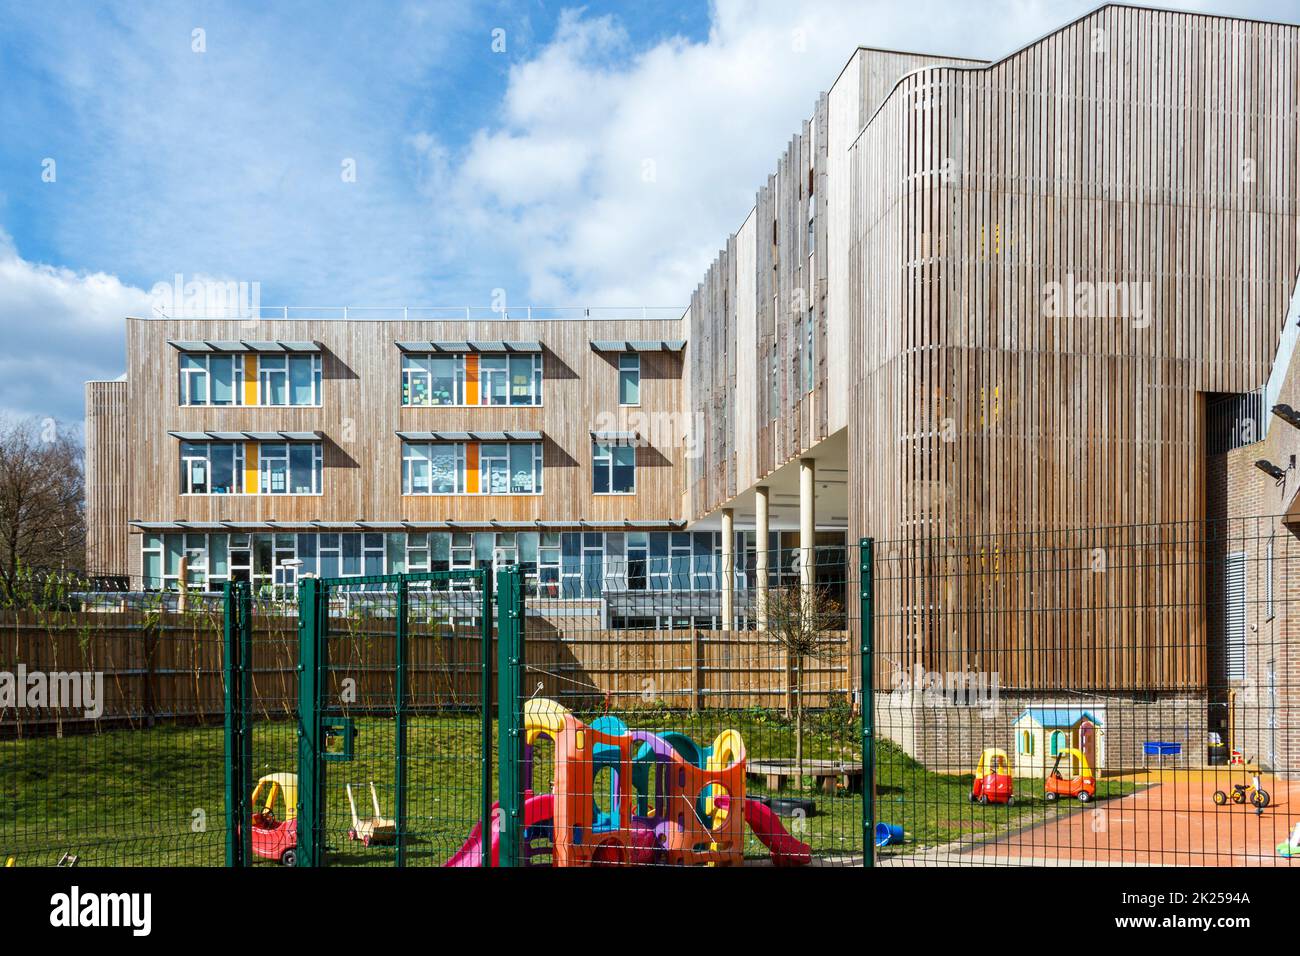 The RIBA award-winning Ashmount Primary School, the UK's first carbon-negative 'in use' school, Bowler's nursery in the foreground, North London, UK Stock Photo